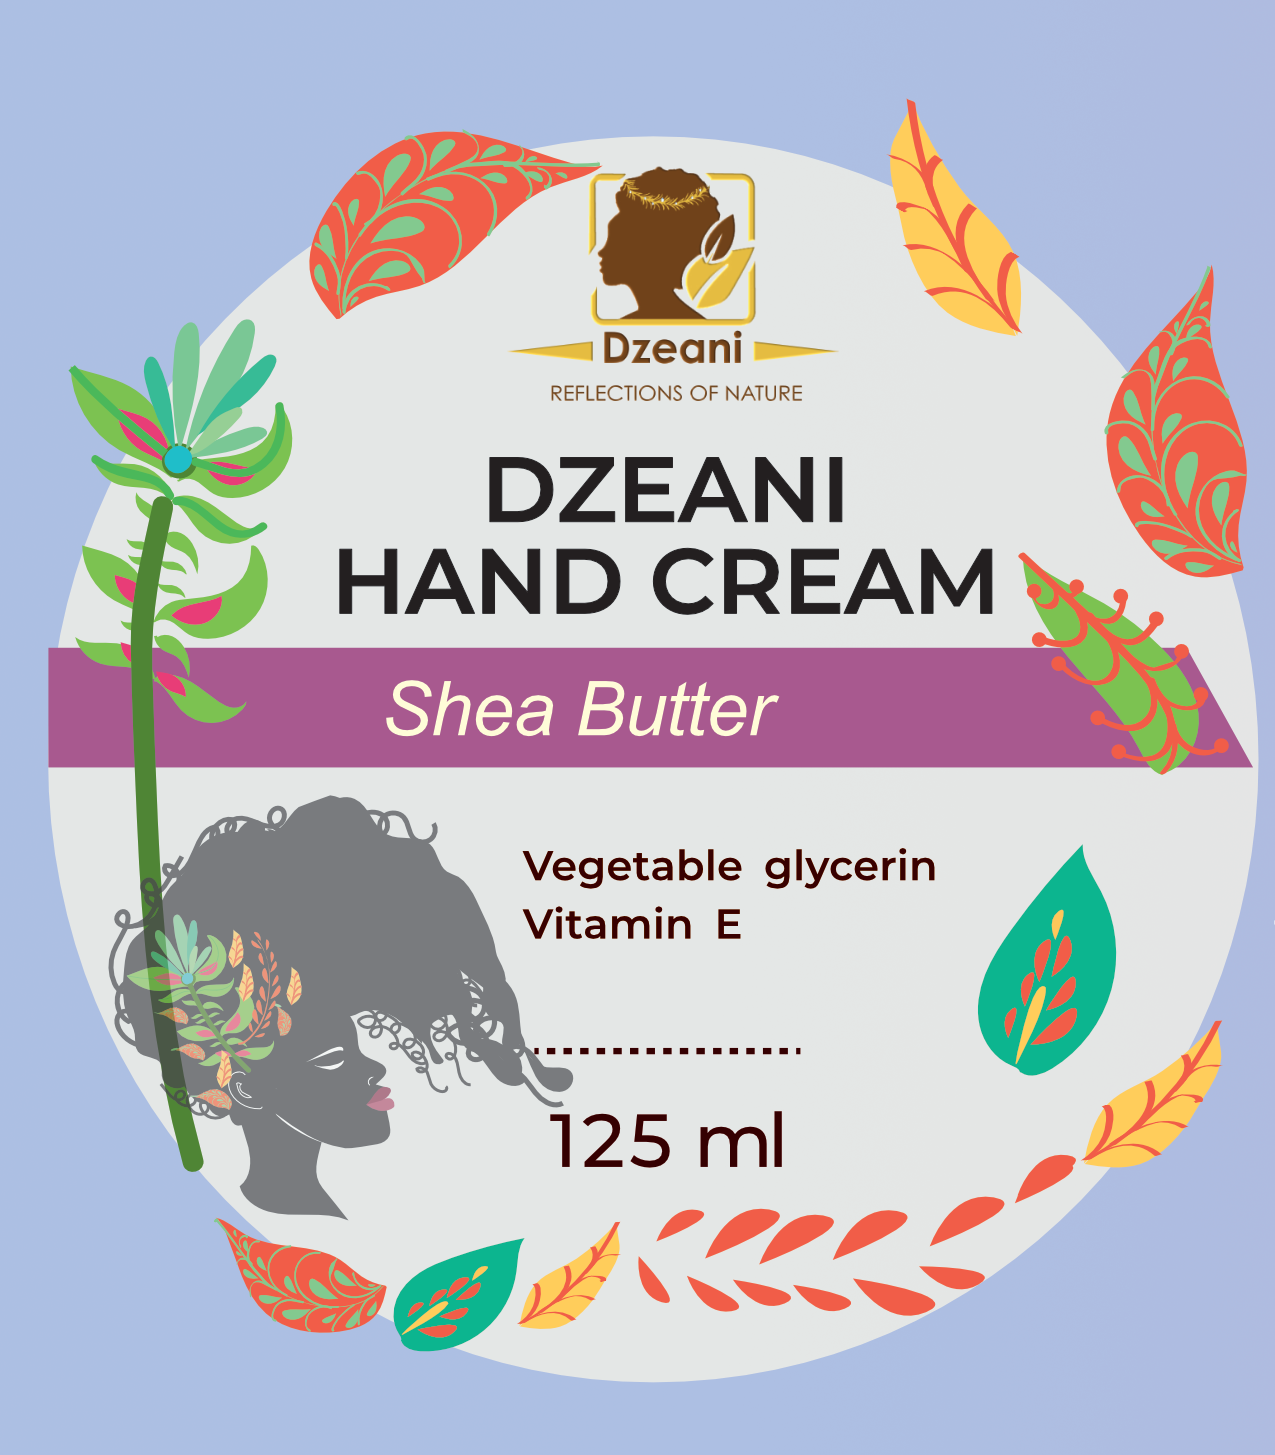 Our Dzeani Hand Cream formula contains a 20% concentration of African Shea Butter, which helps to protect, nourish, and moisturize hands